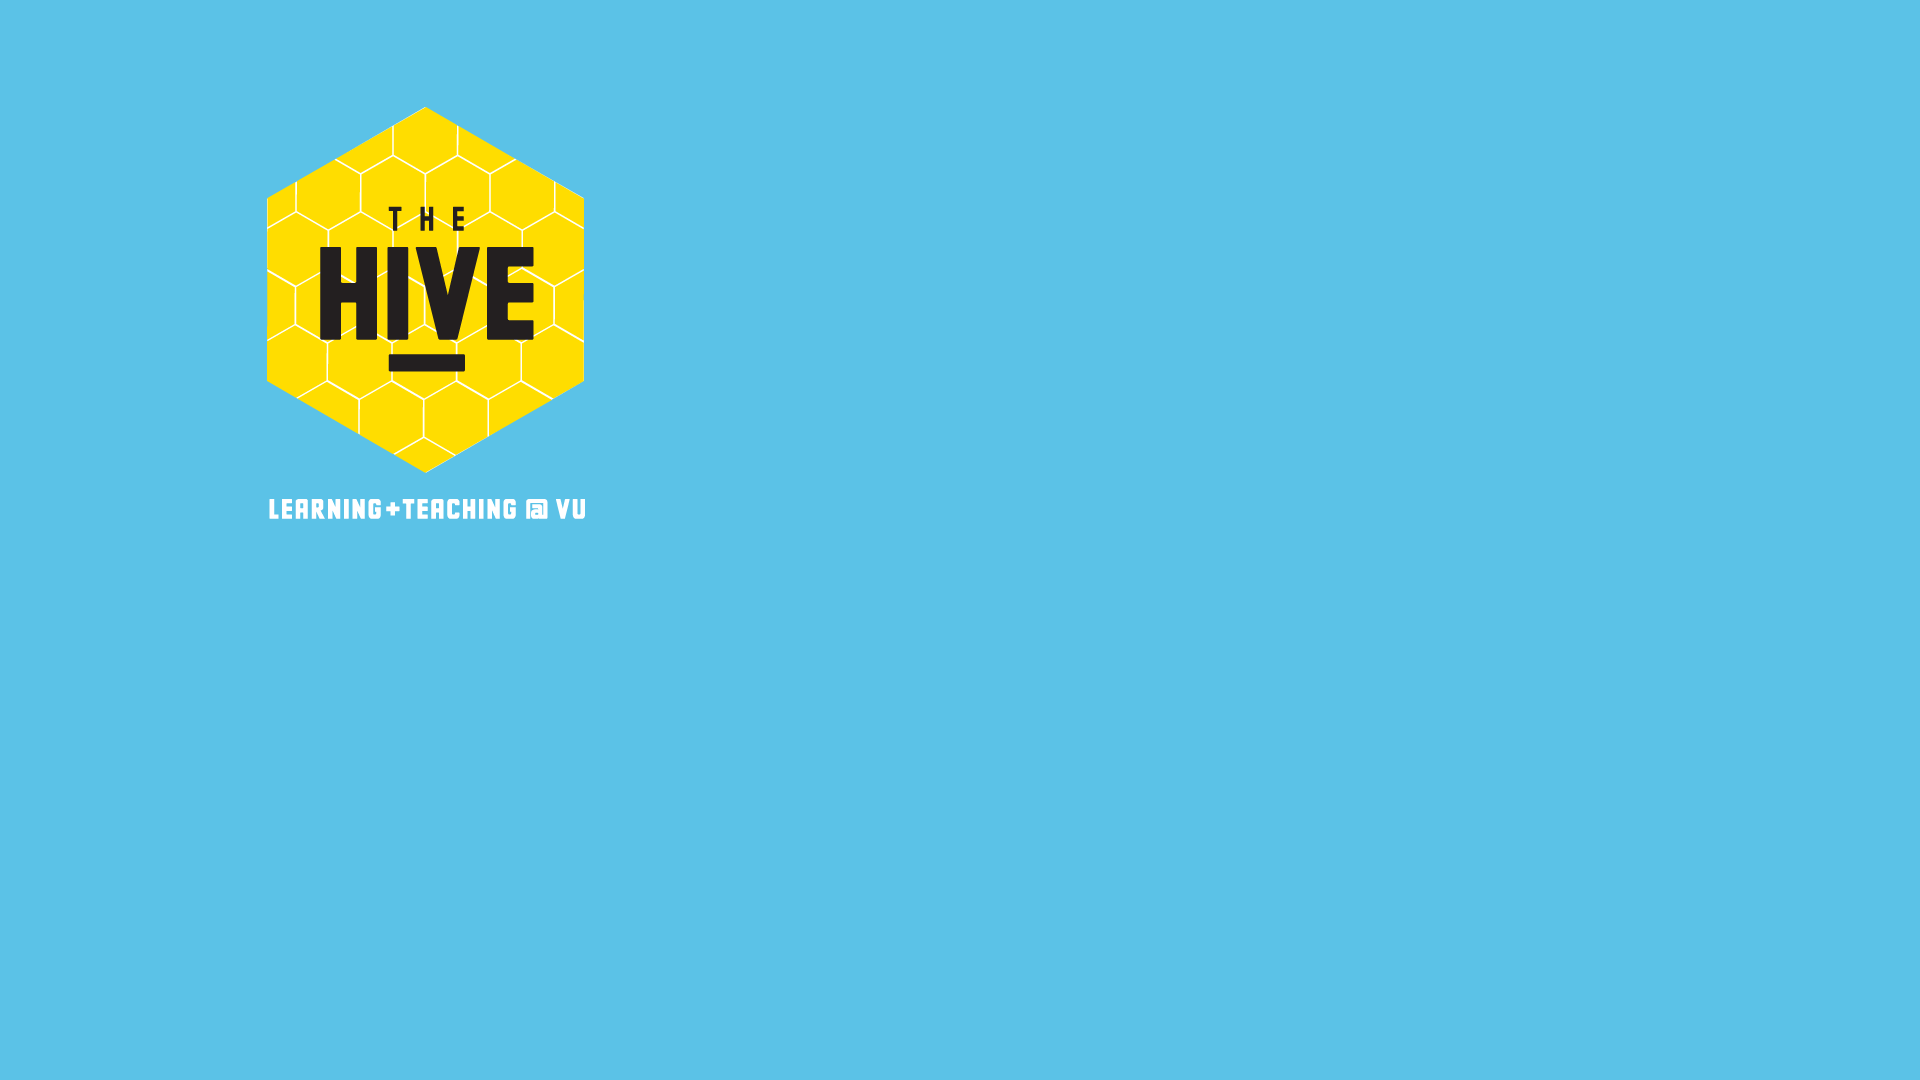 Zoom Virtual Background with The Hive logo